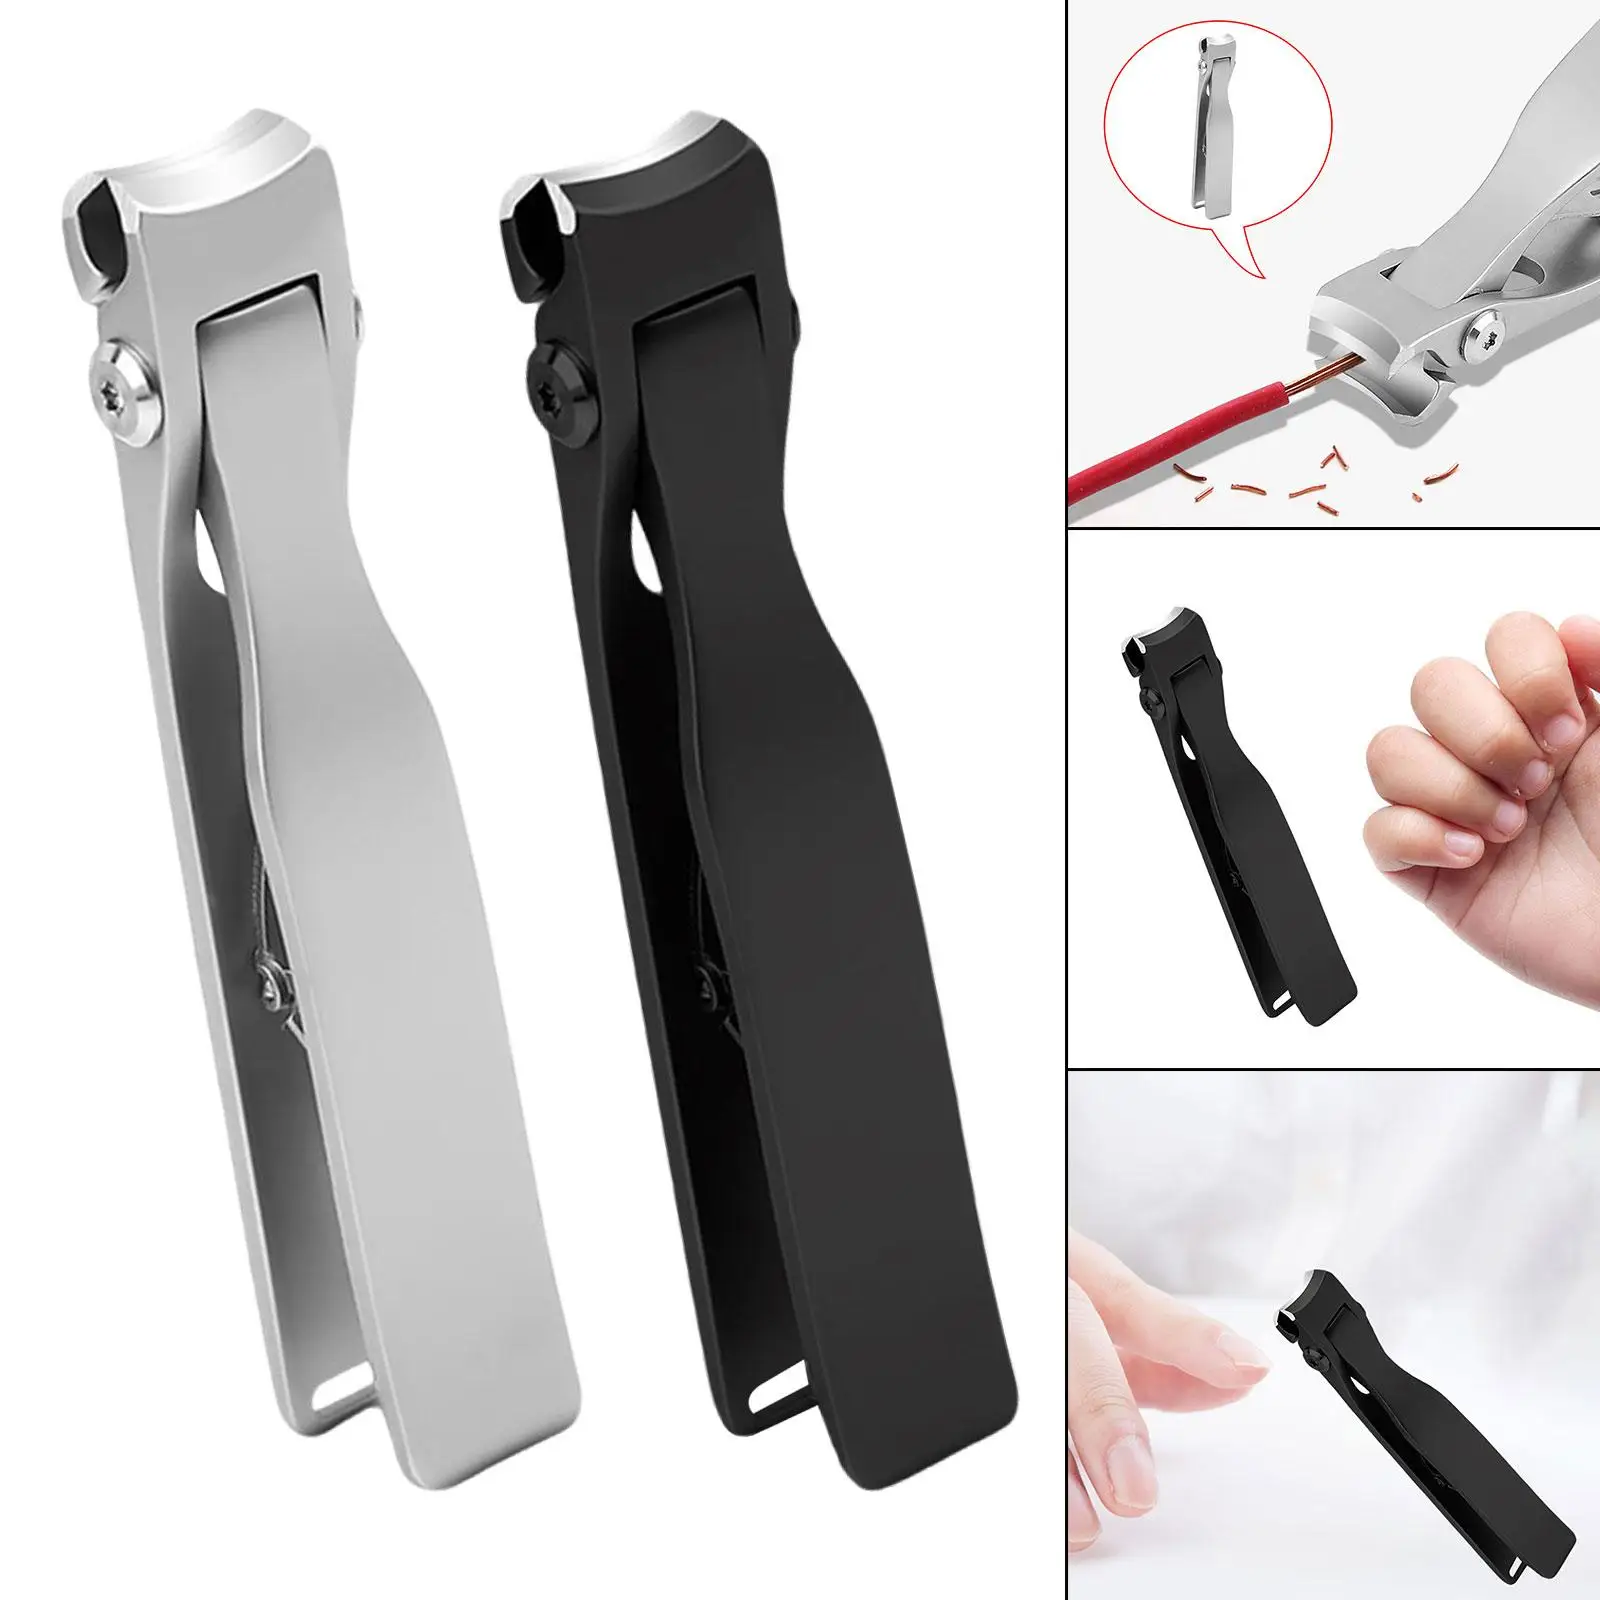 Nail Clippers Nail Trimmer Anti Splash Ergonomic with Wide Jaws Fingernail and Toenail Clipper Nail File for Men Women Adult